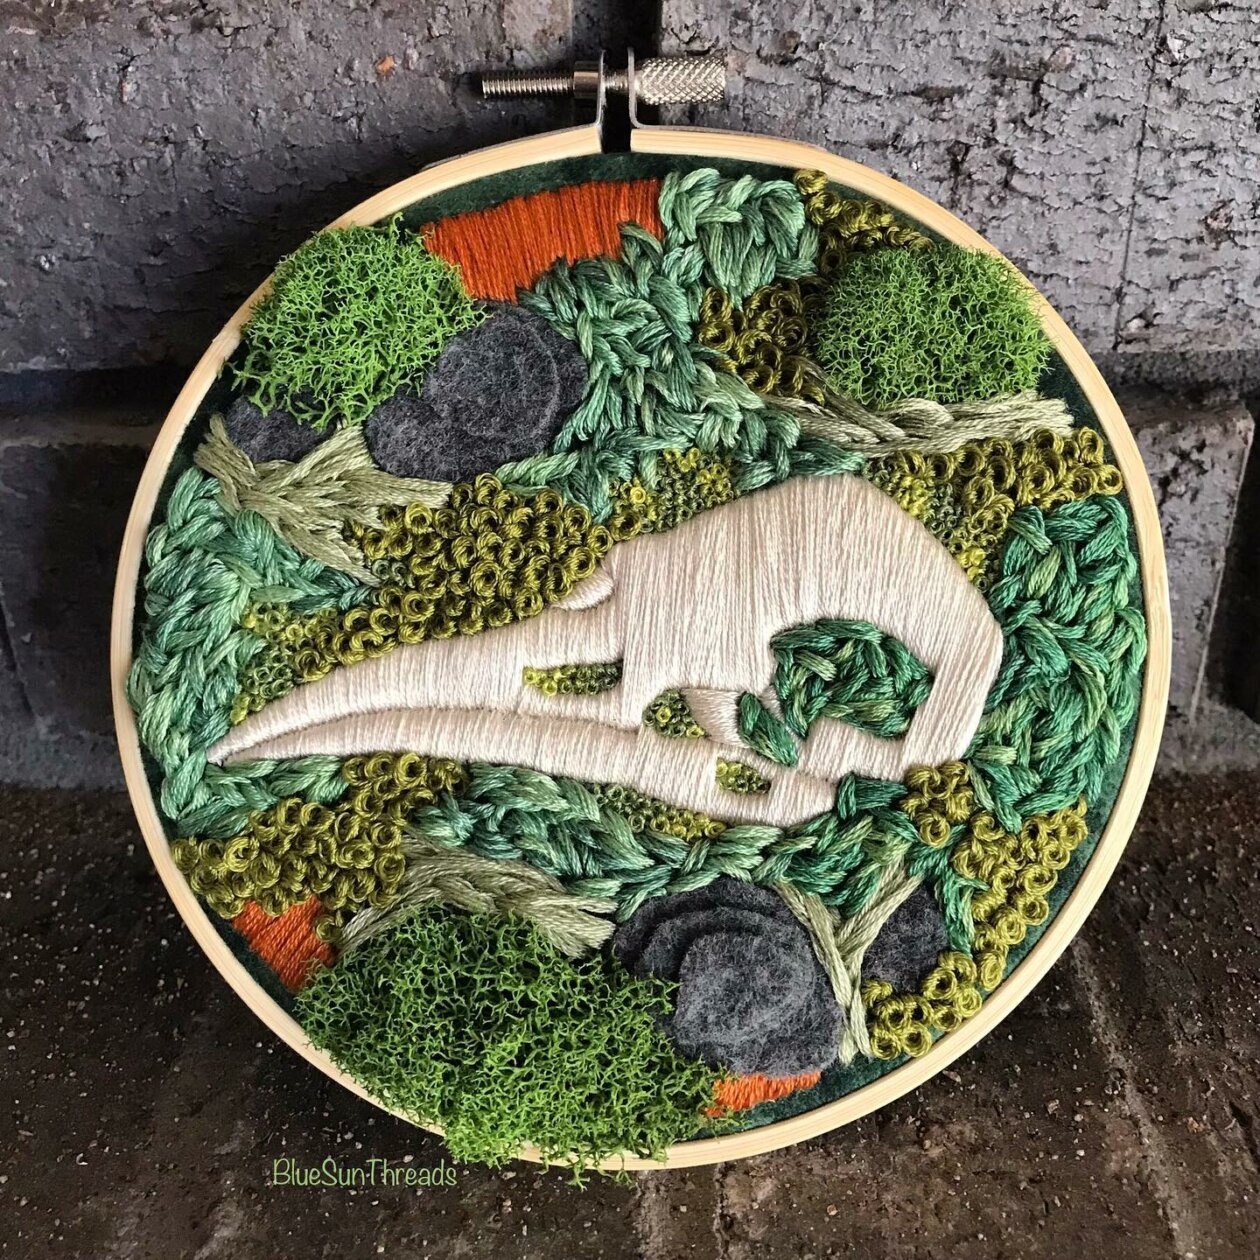 Embroidered Fossils, The Nature Inspired Embroidery Art Of Rachel Crisp (6)